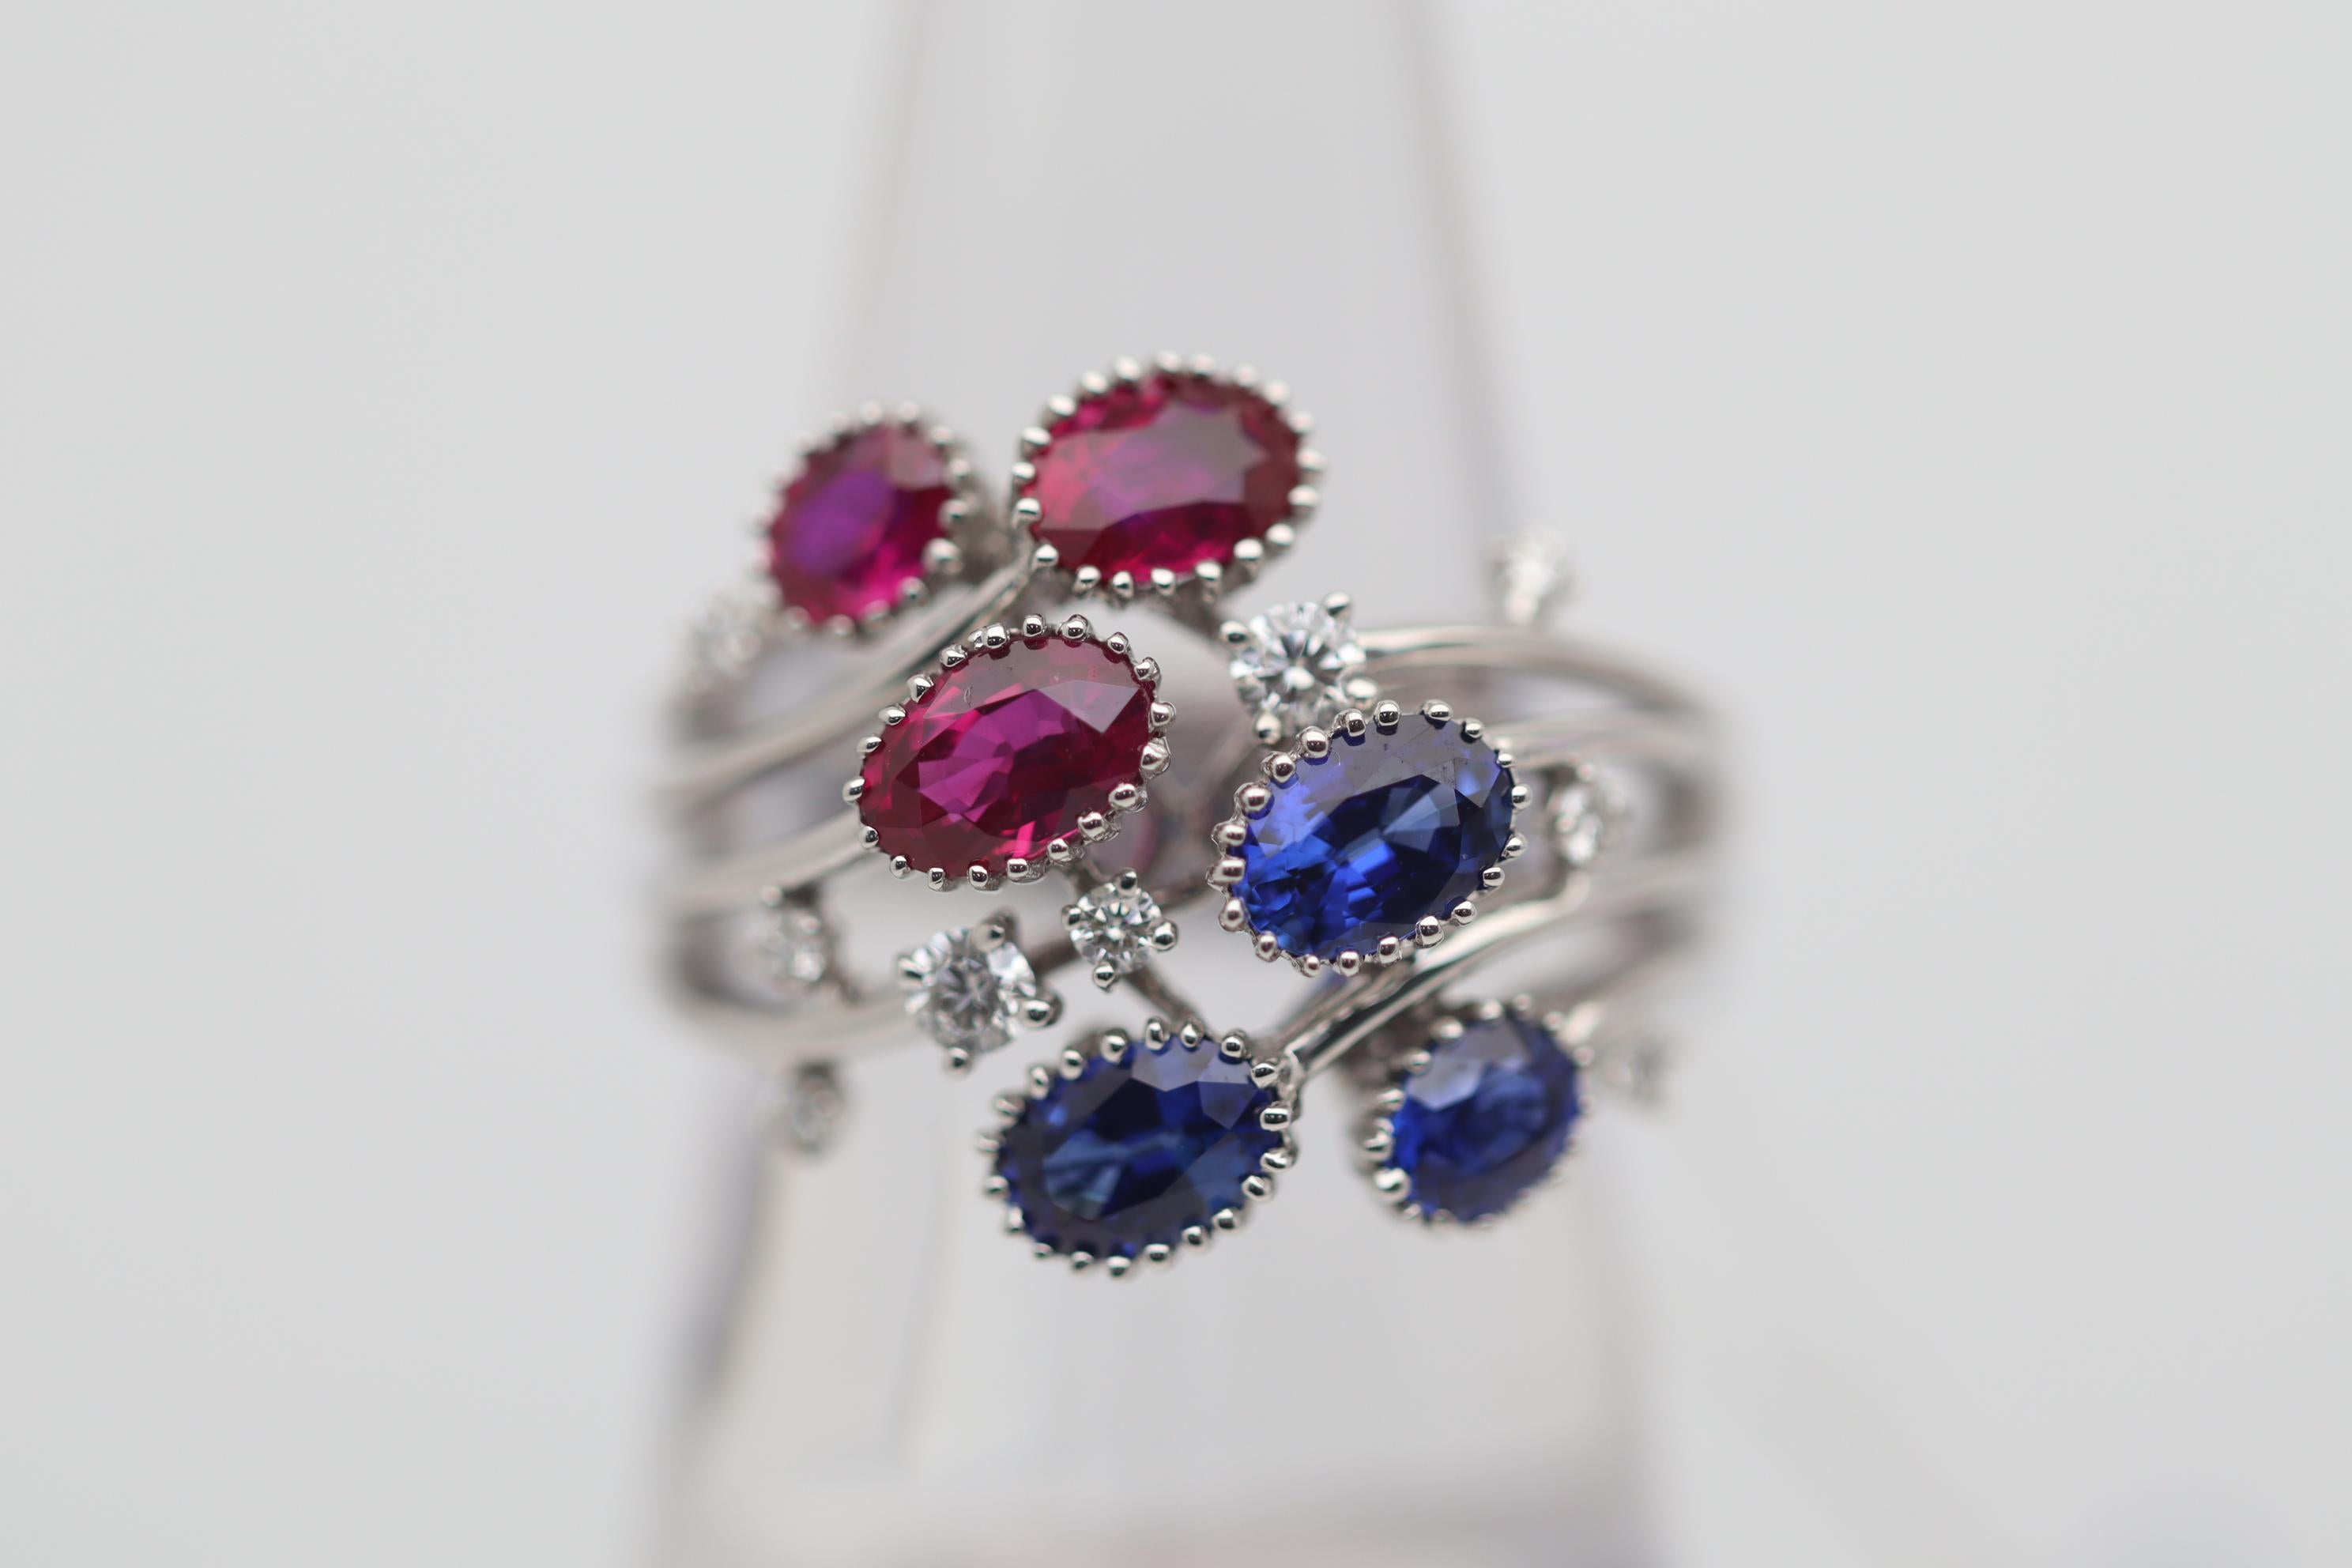 One of our new favorite pieces in our collection! This breathtaking floral ring features 3 vivid red gem rubies and 3 equally as beautiful vivid royal blue sapphires. They weigh a total of 1.62 carats and 1.49 carats respectively. Diamonds, 0.26